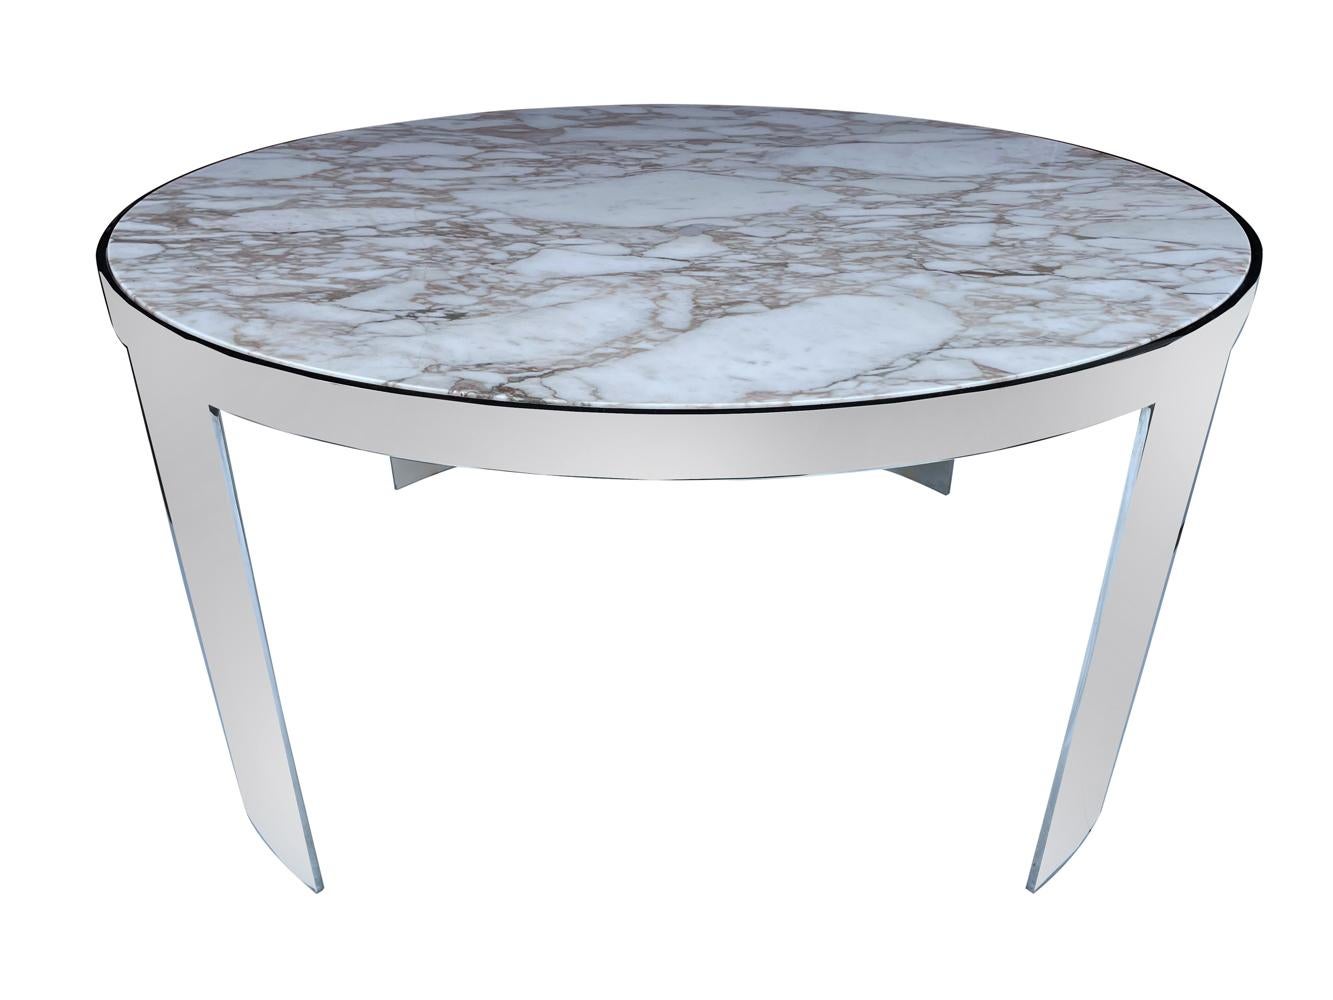 Late 20th Century Large Marble Mid-Century Modern Round Dining or Center Table by Leon Rosen